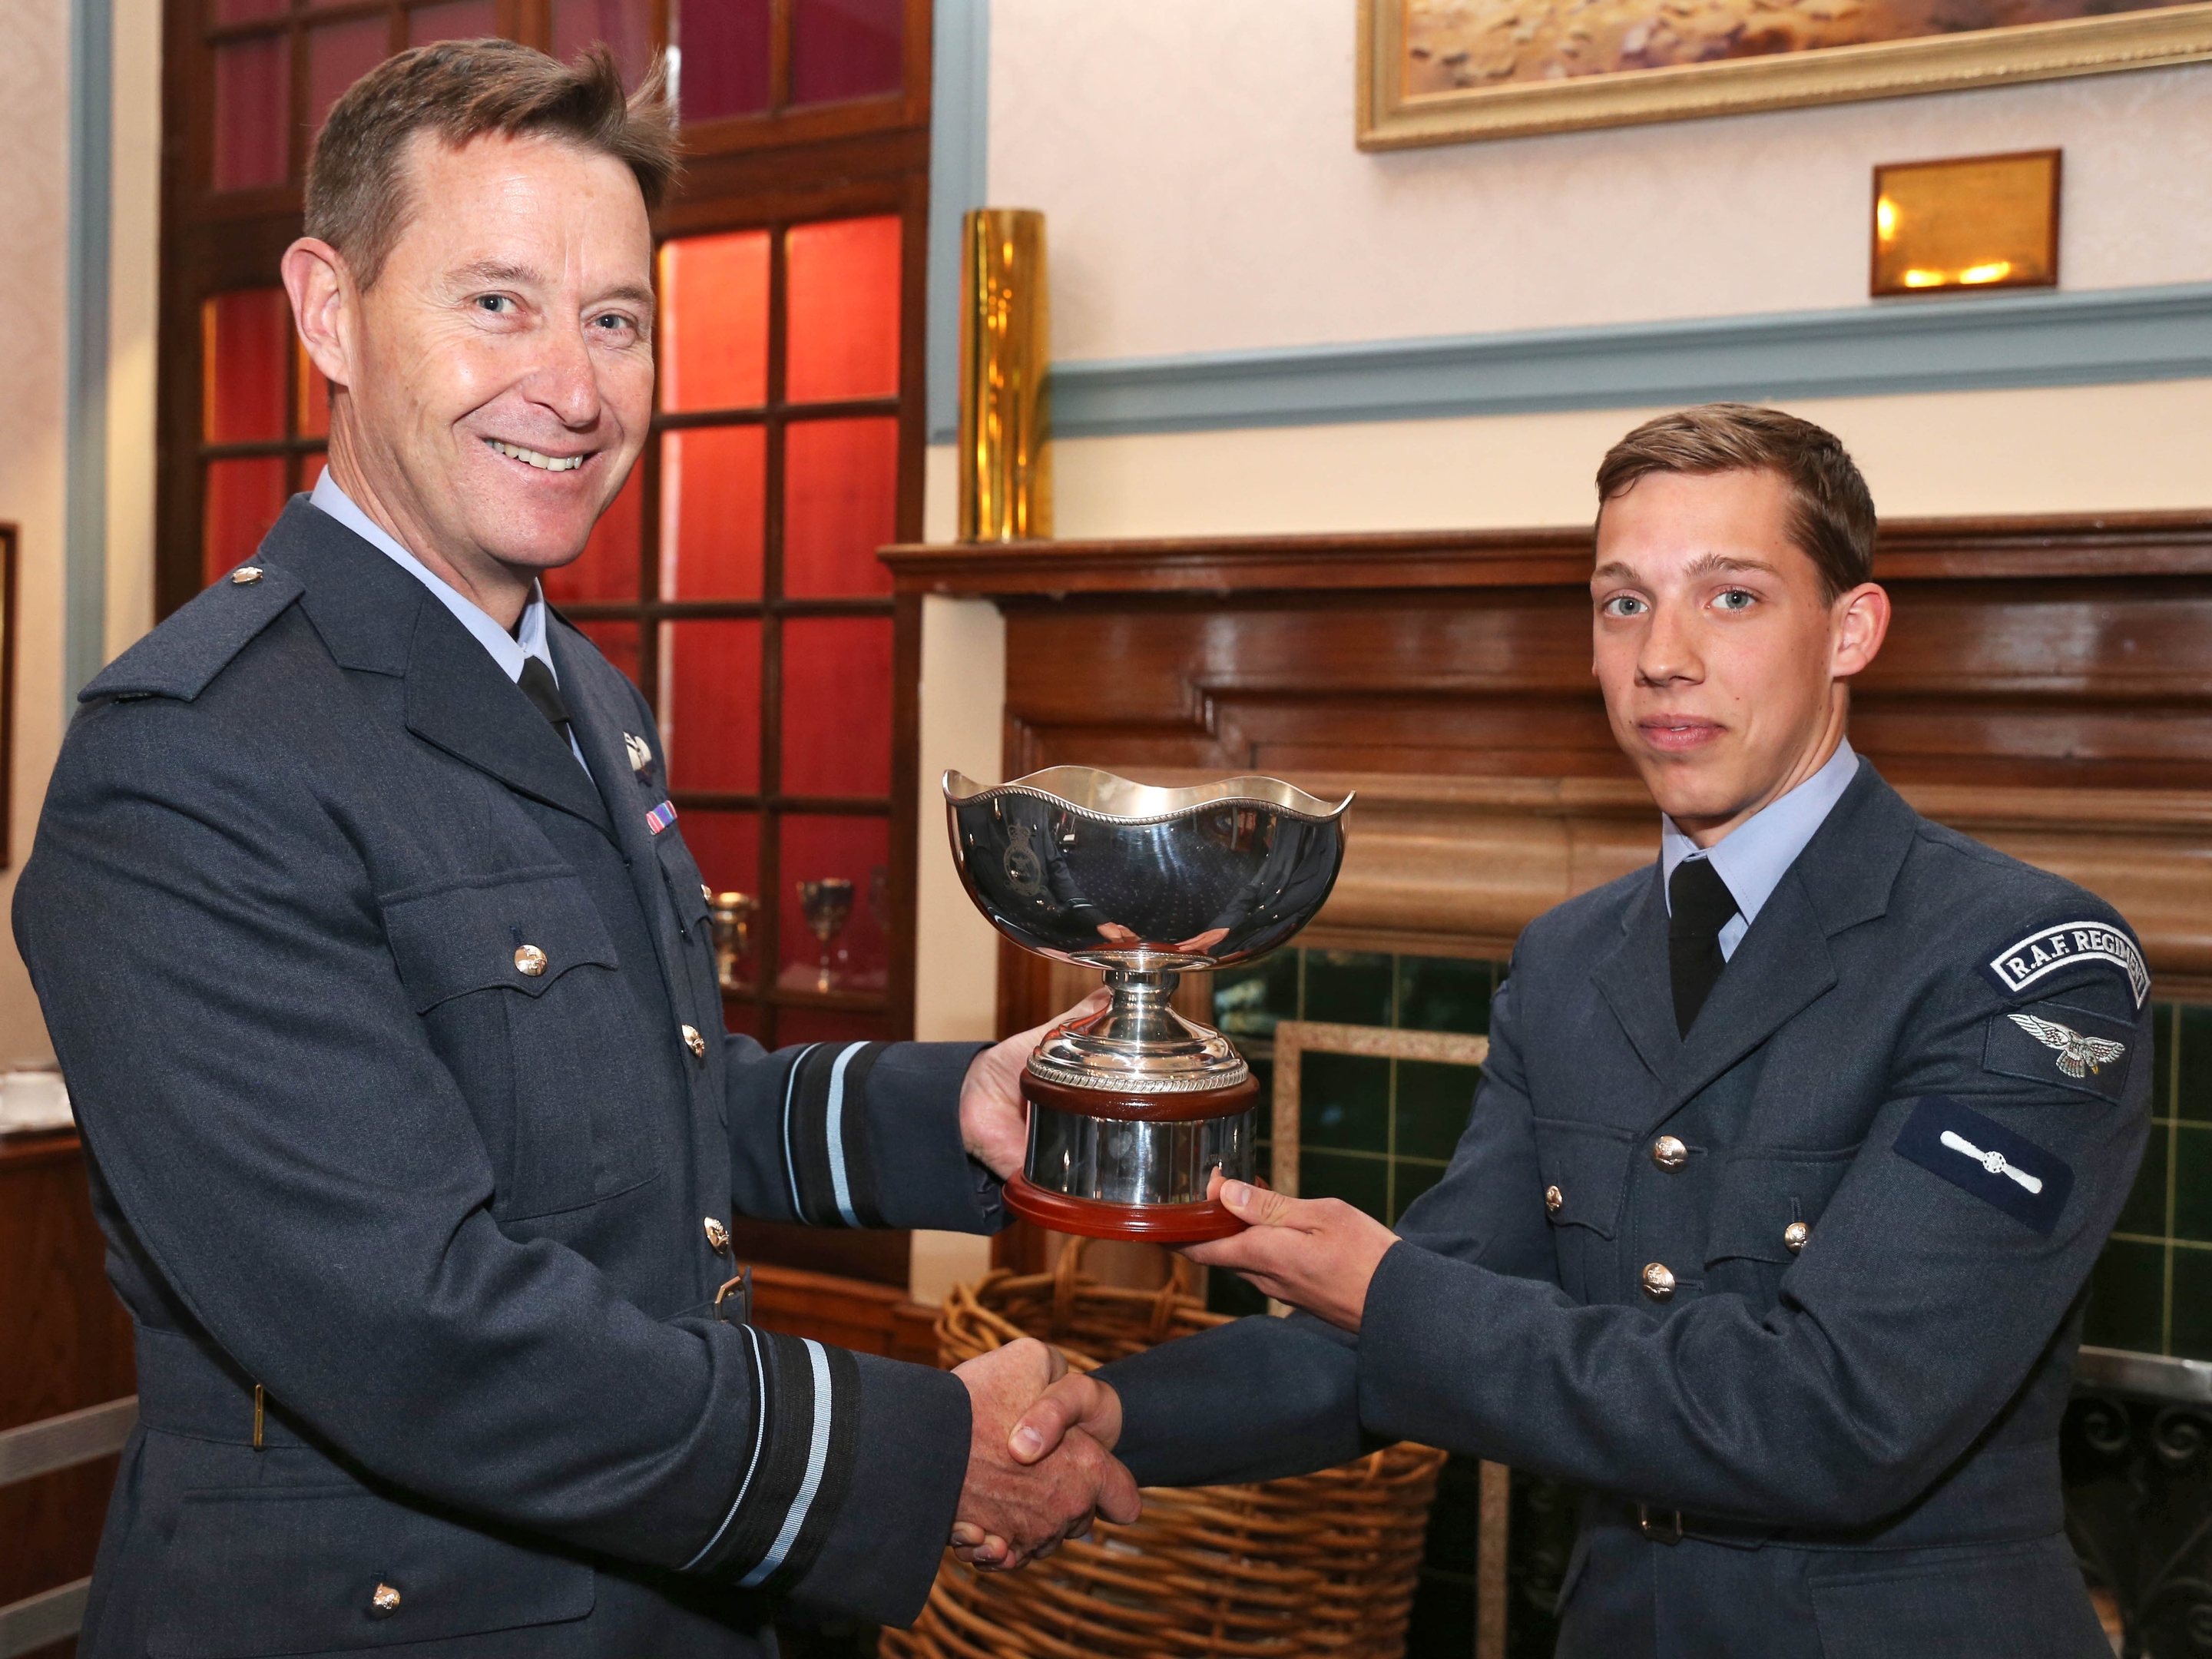 Air Vice-Marshal Gavin Parker, Air Officer Commanding 2 Group presents the McFerran Prize to SAC James Lewis, 51 Squadron RAF Regiment.